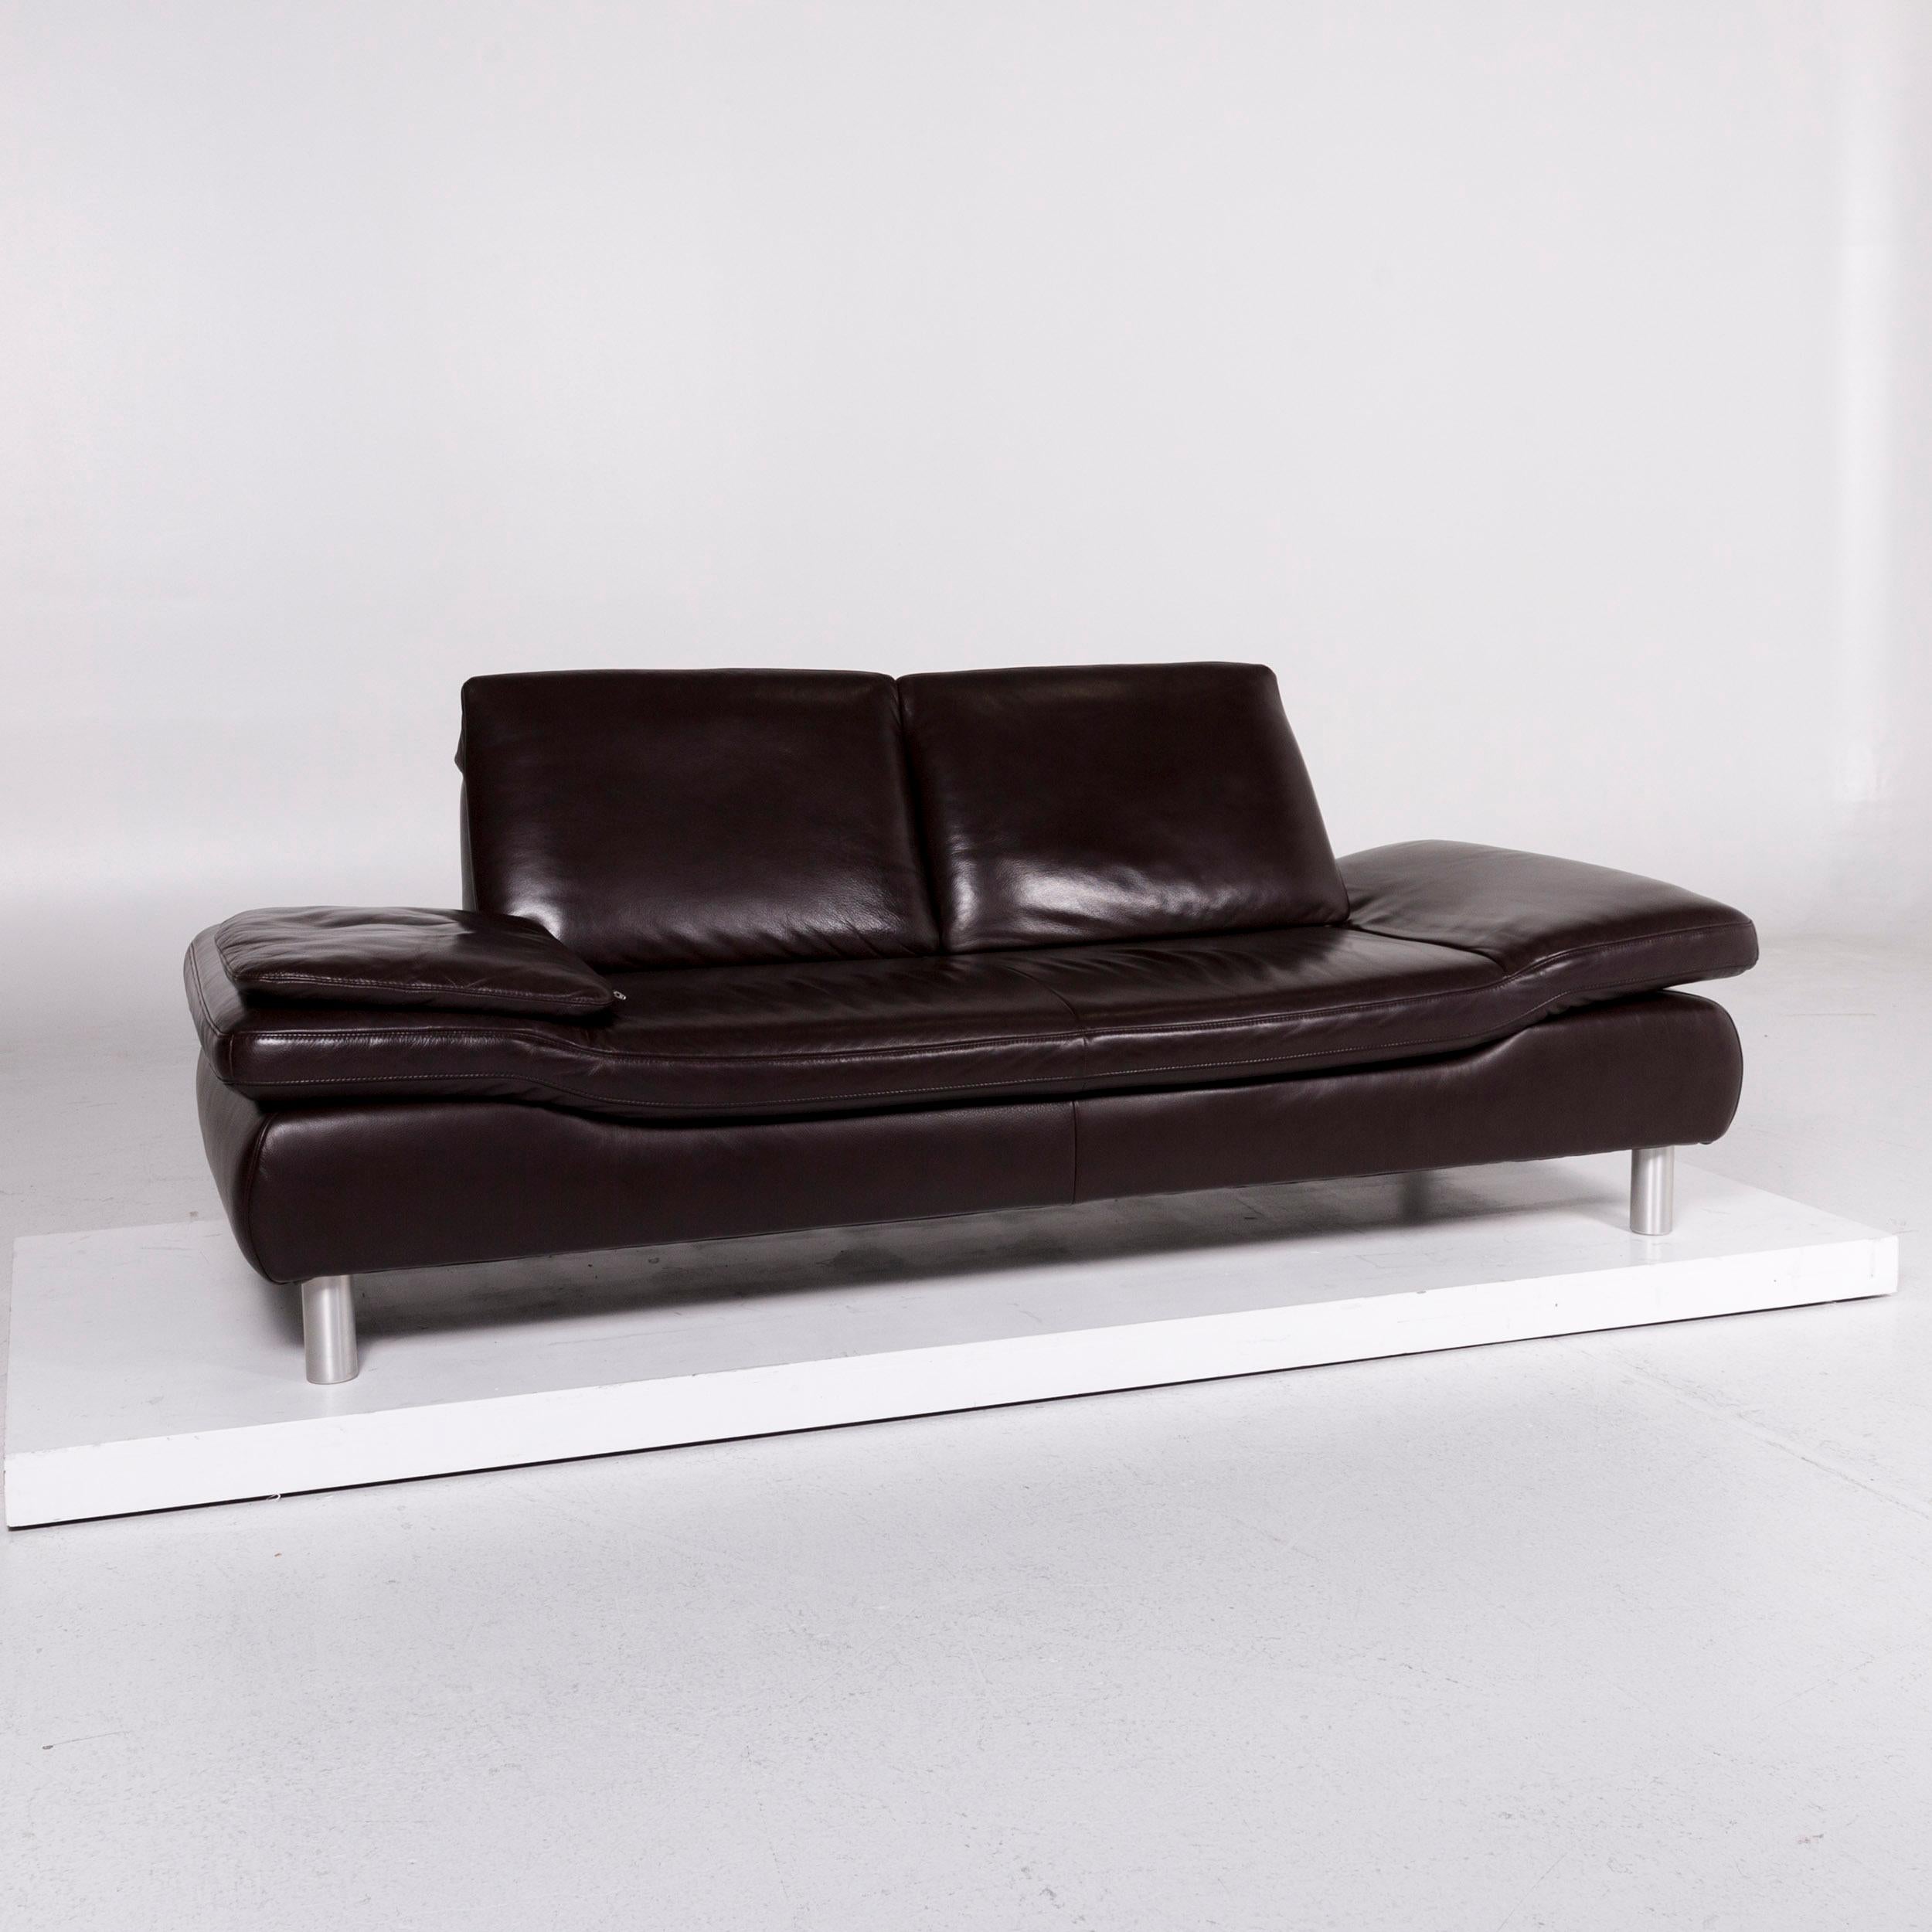 We bring to you a Koinor Rossini leather sofa brown dark brown function couch.
 
 Product measurements in centimeters:
 
Depth 86
Width 210
Height 80
Seat-height 41
Rest-height 45
Seat-depth 52
Seat-width 125
Back-height 39.
   